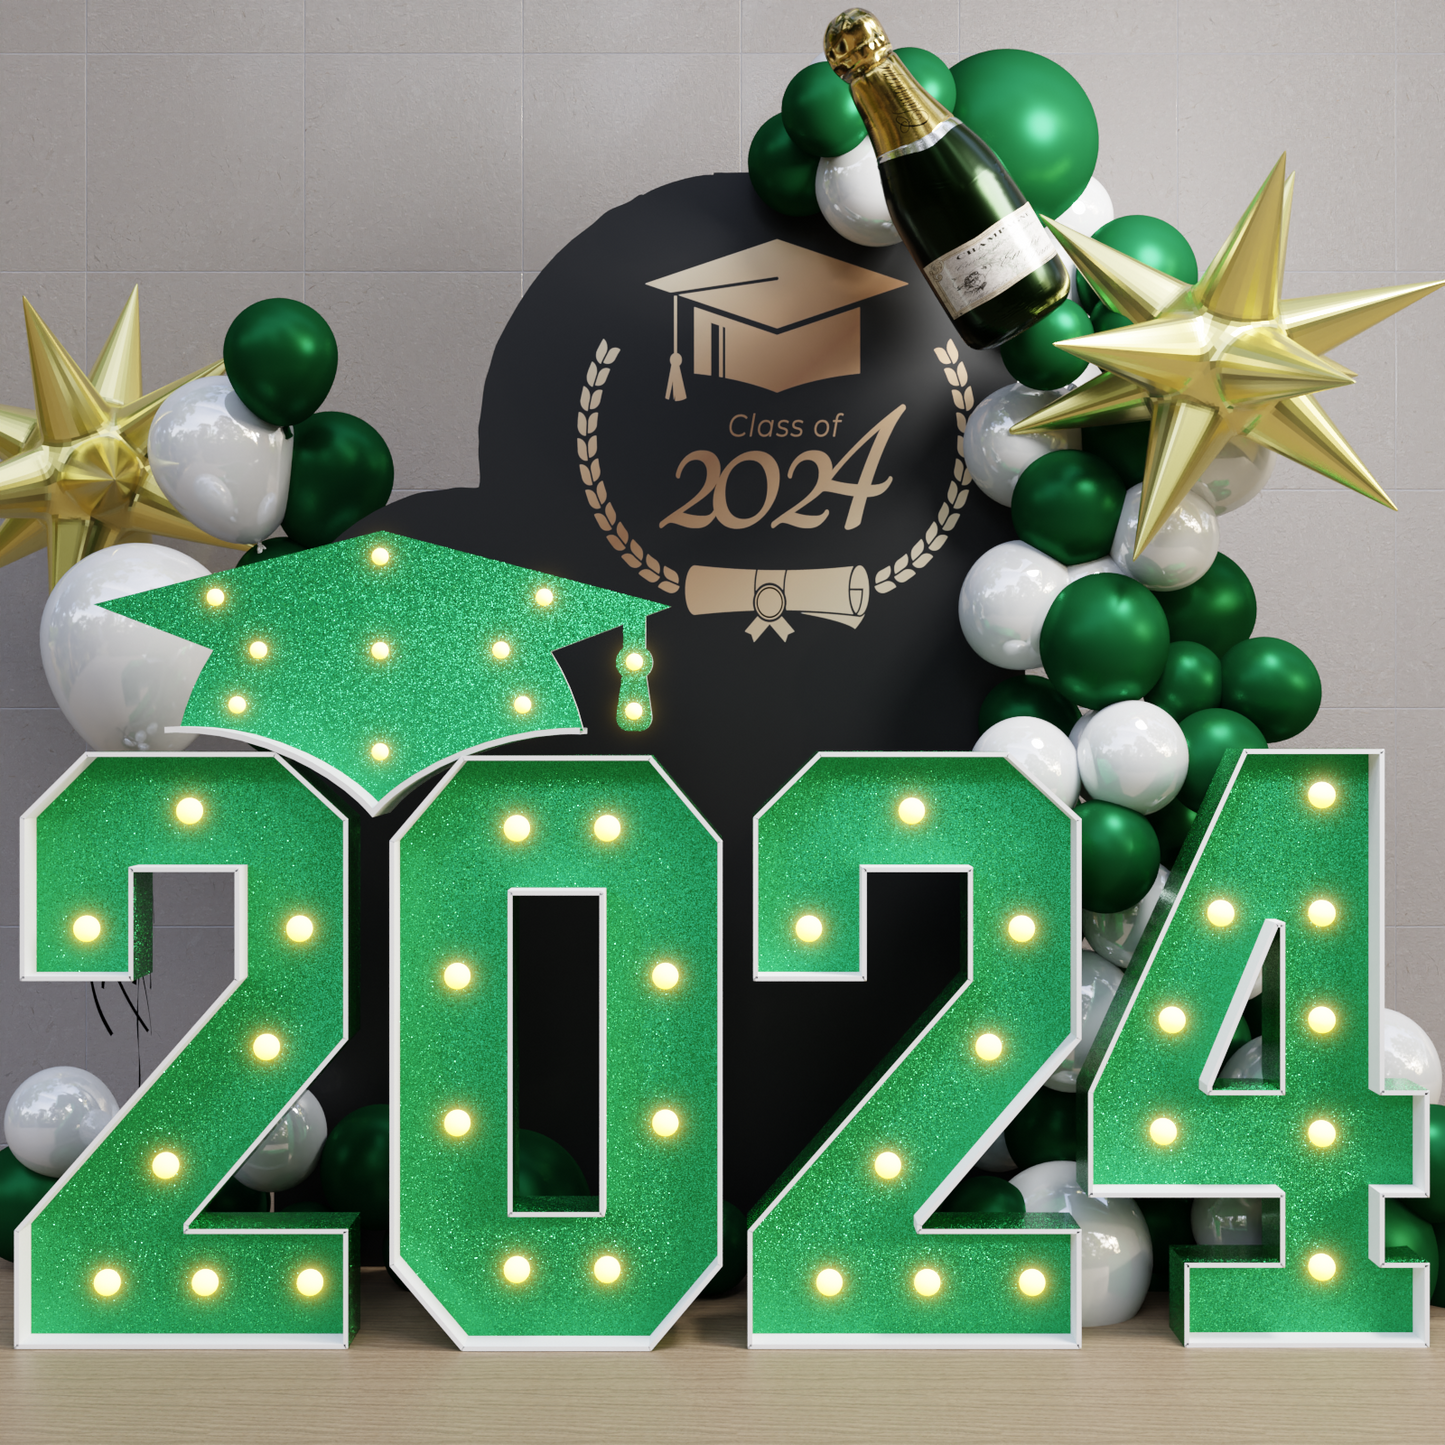 2.3FT Precut Marquee Numbers DIY Kit for Graduation